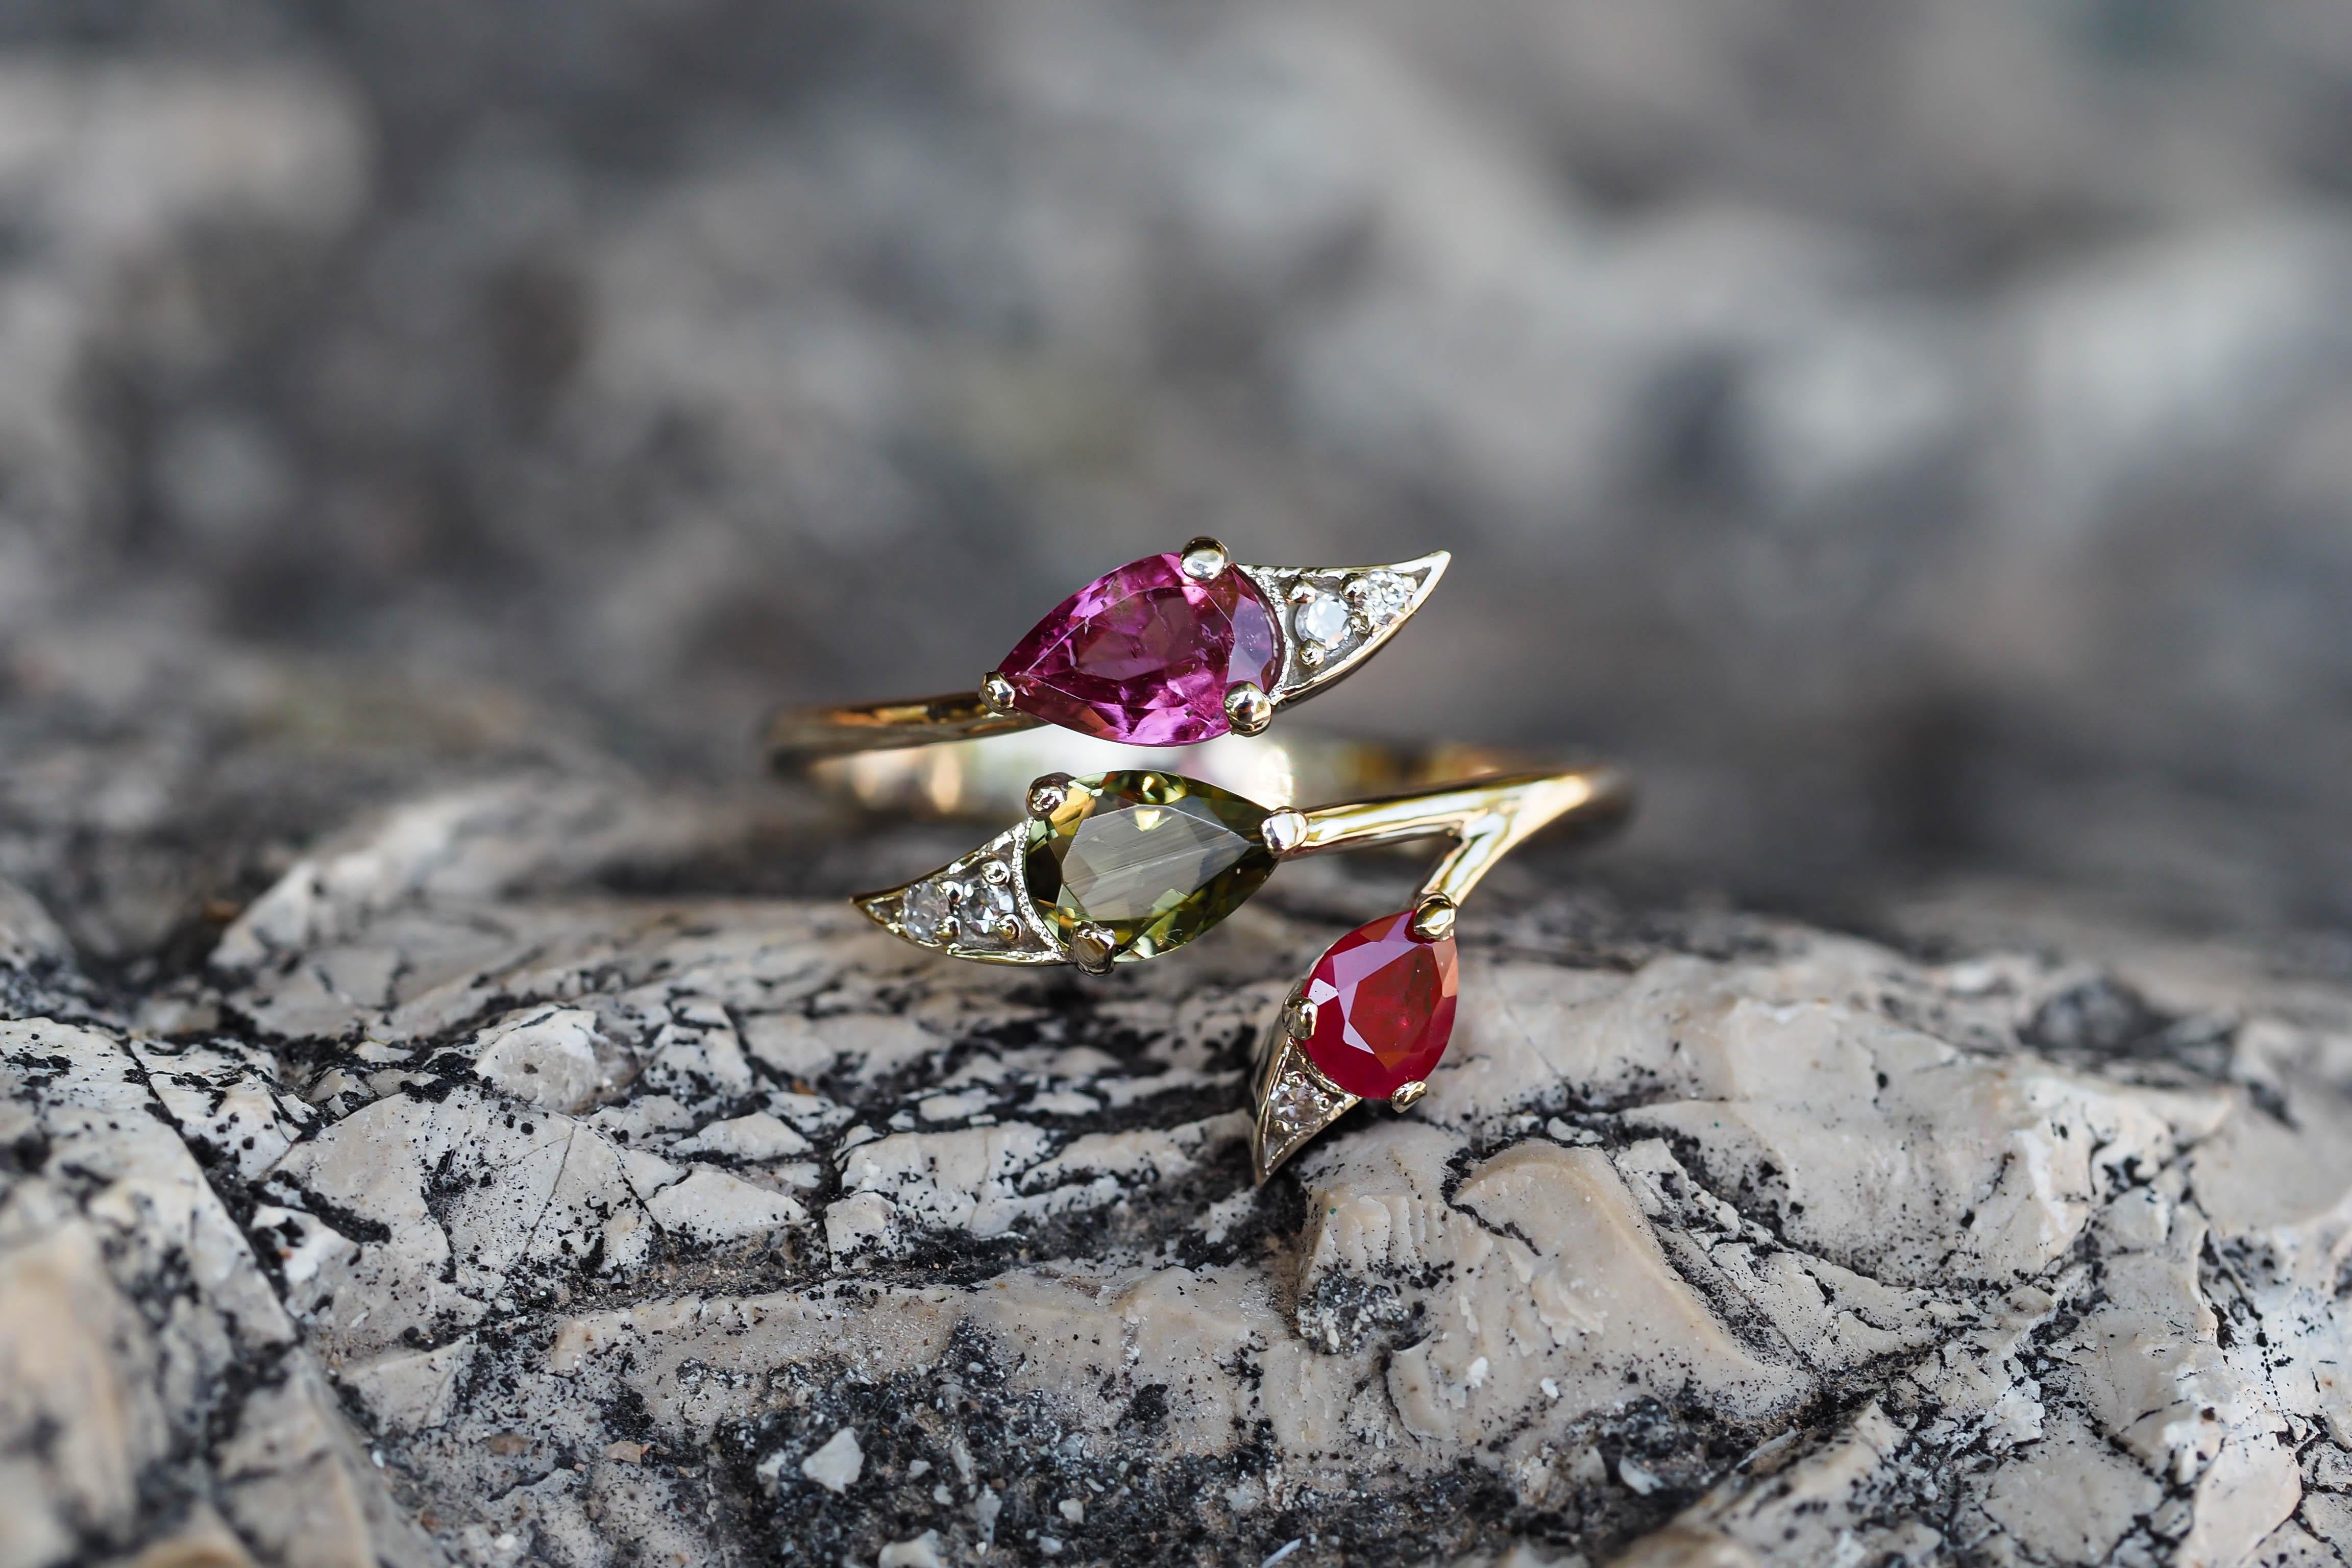 Pink, green tourmaline ring in 14k gold. 
Pear tourmaline ring. Pear ruby ring. 3 gemstone ring. Opened ended ring. October birthstone ring.

Weight: 2.25 g. depends from size
Metal: 14k gold.

Ruby:
Cut: Pear
Weight: approx 0.42 ct.
Color: